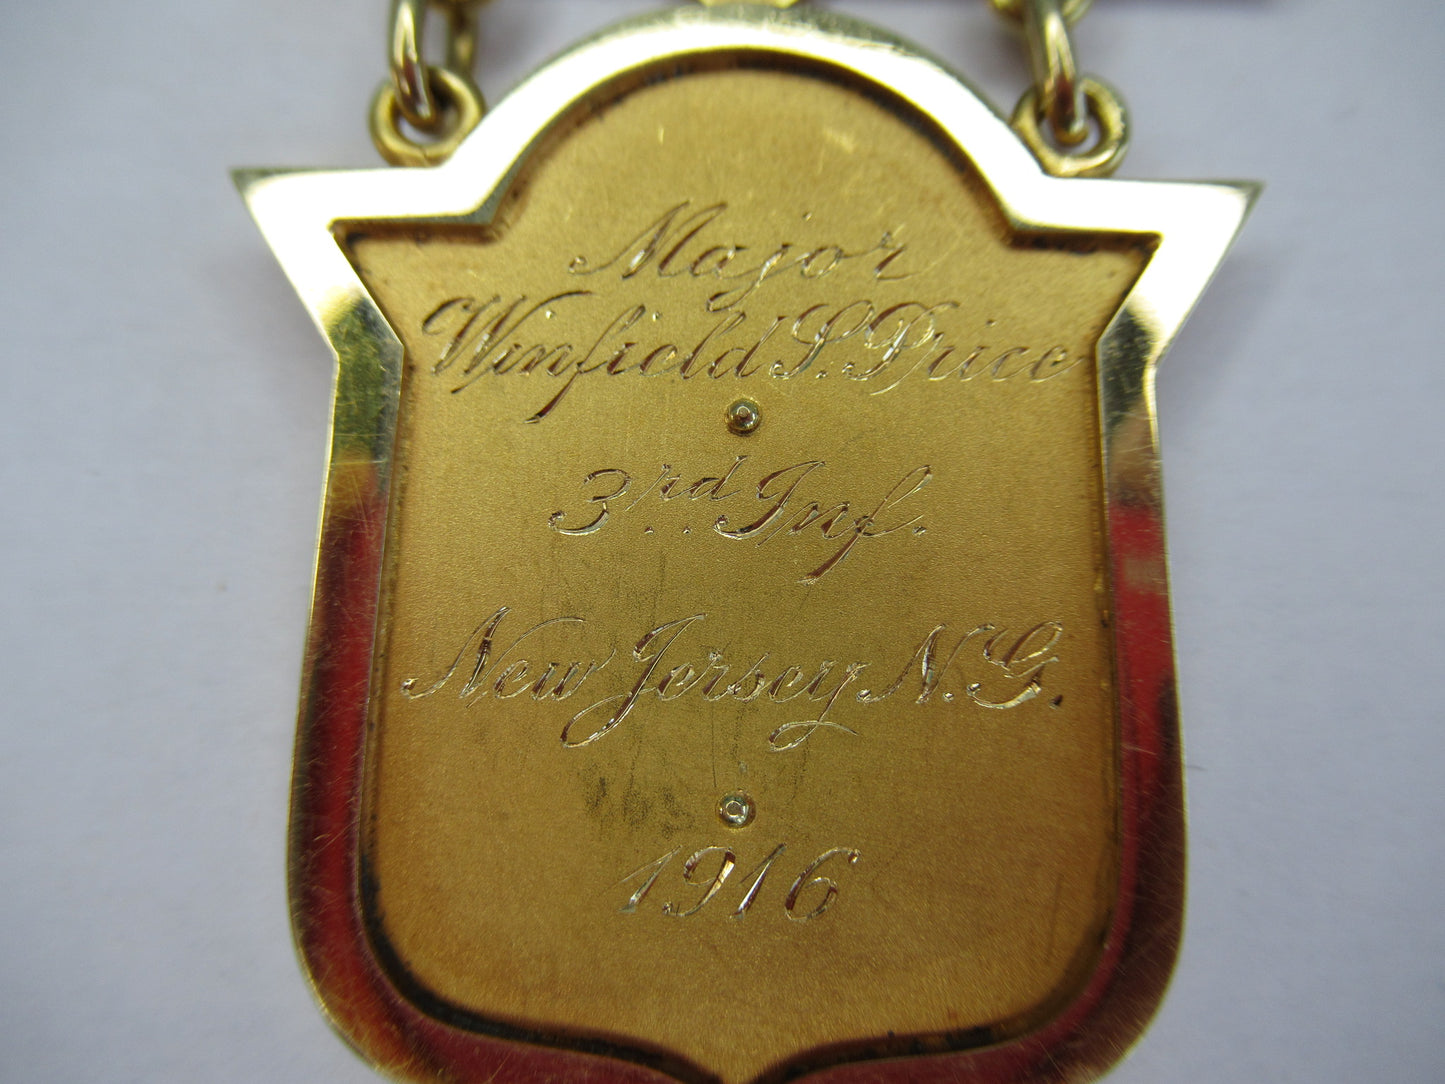 USA GOLD DISTINGUISHED MARKSMAN SHOOTING BADGE AWARDED TO MAJ. WINDFIELD PRICE, 3RD INF. 1916. MADE IN SOLID 14K GOLD.